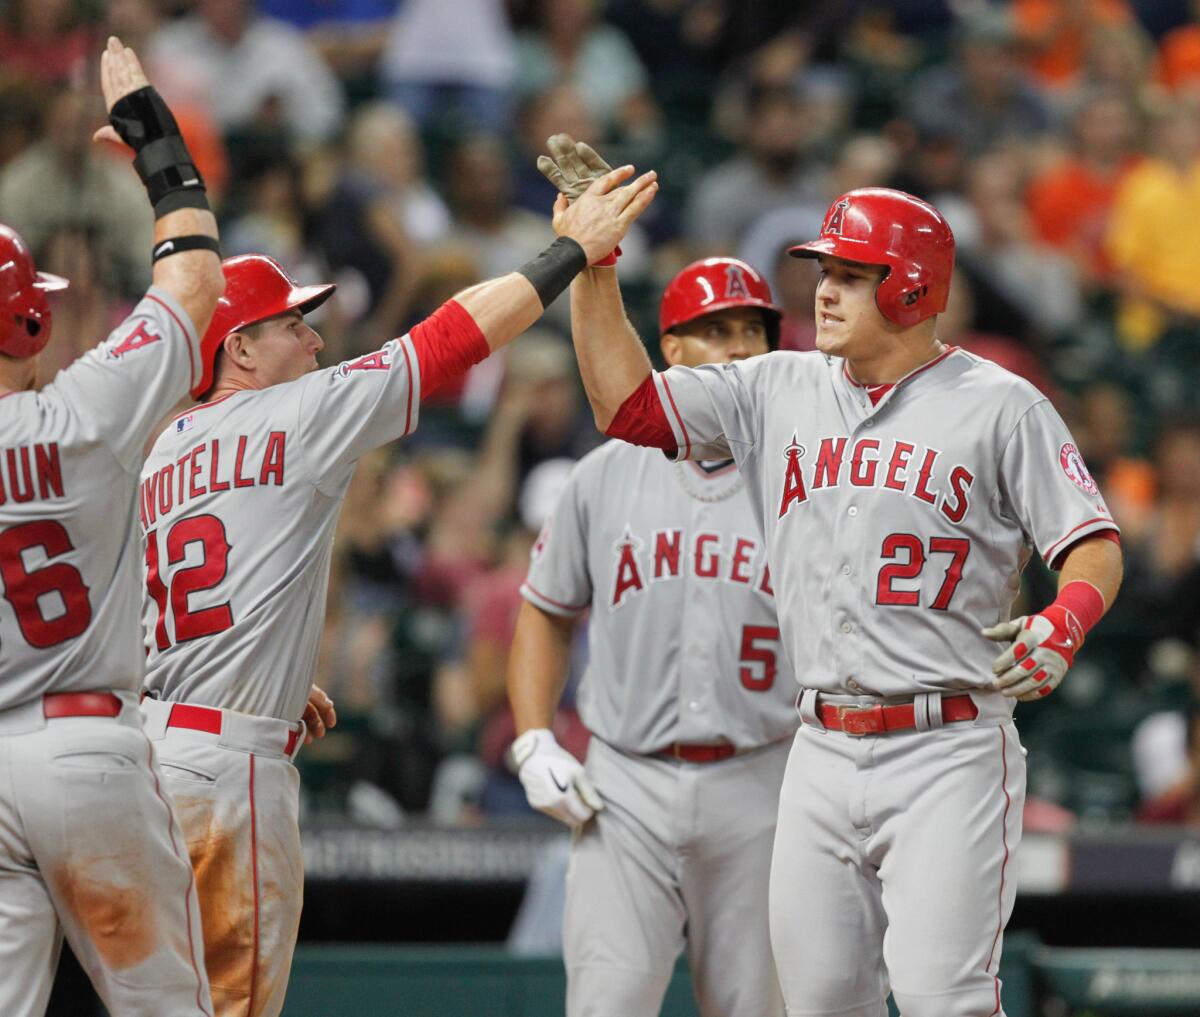 Angels center fielder Mike Trout (27) is congratulated by teammates after hitting a three-run home run in the eighth inning against the Astros on Friday night in Houston.